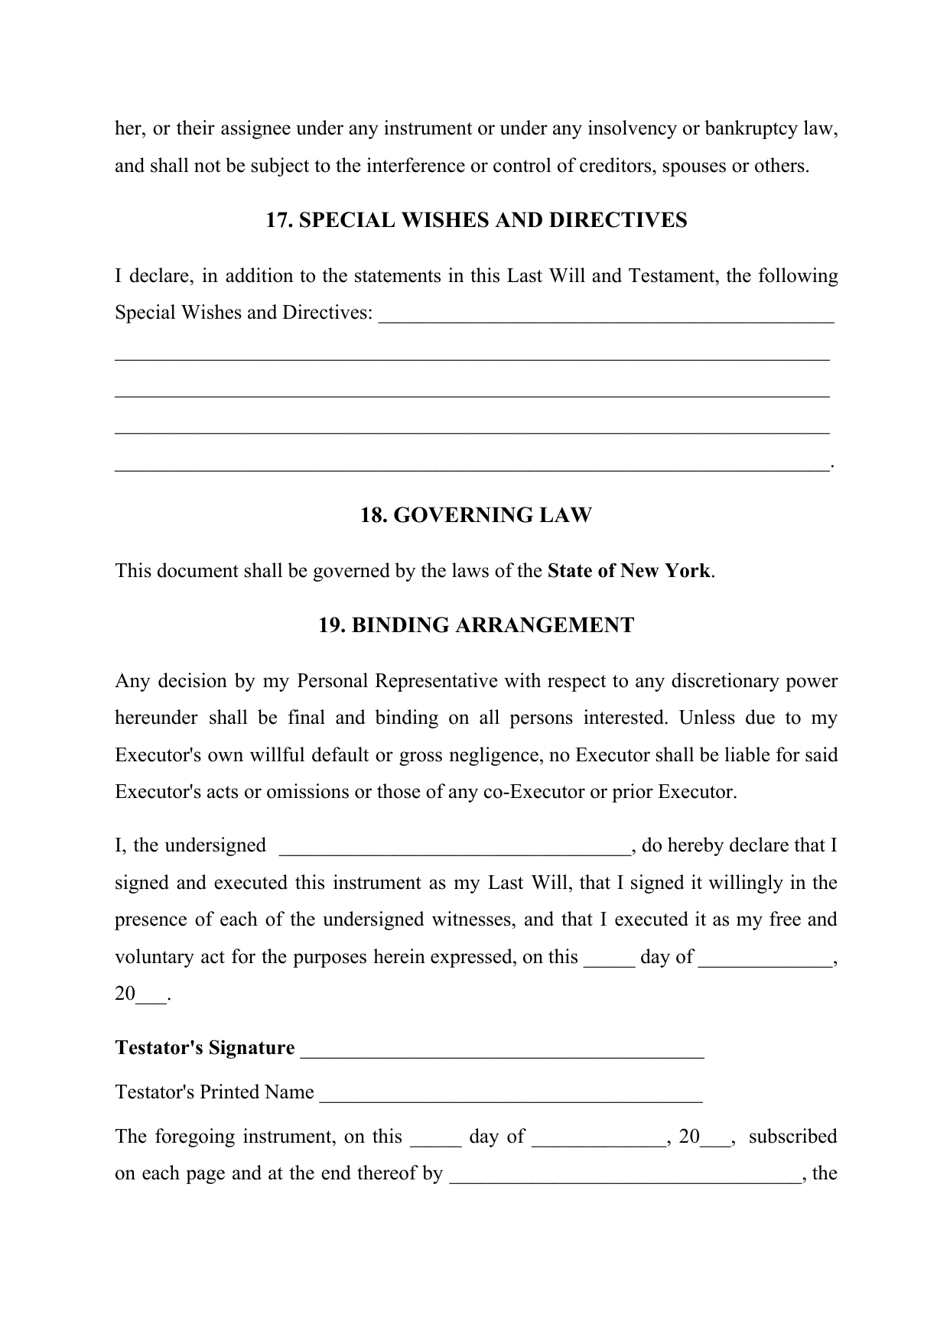 new-hampshire-last-will-and-testament-templates-free-word-pdf-odt